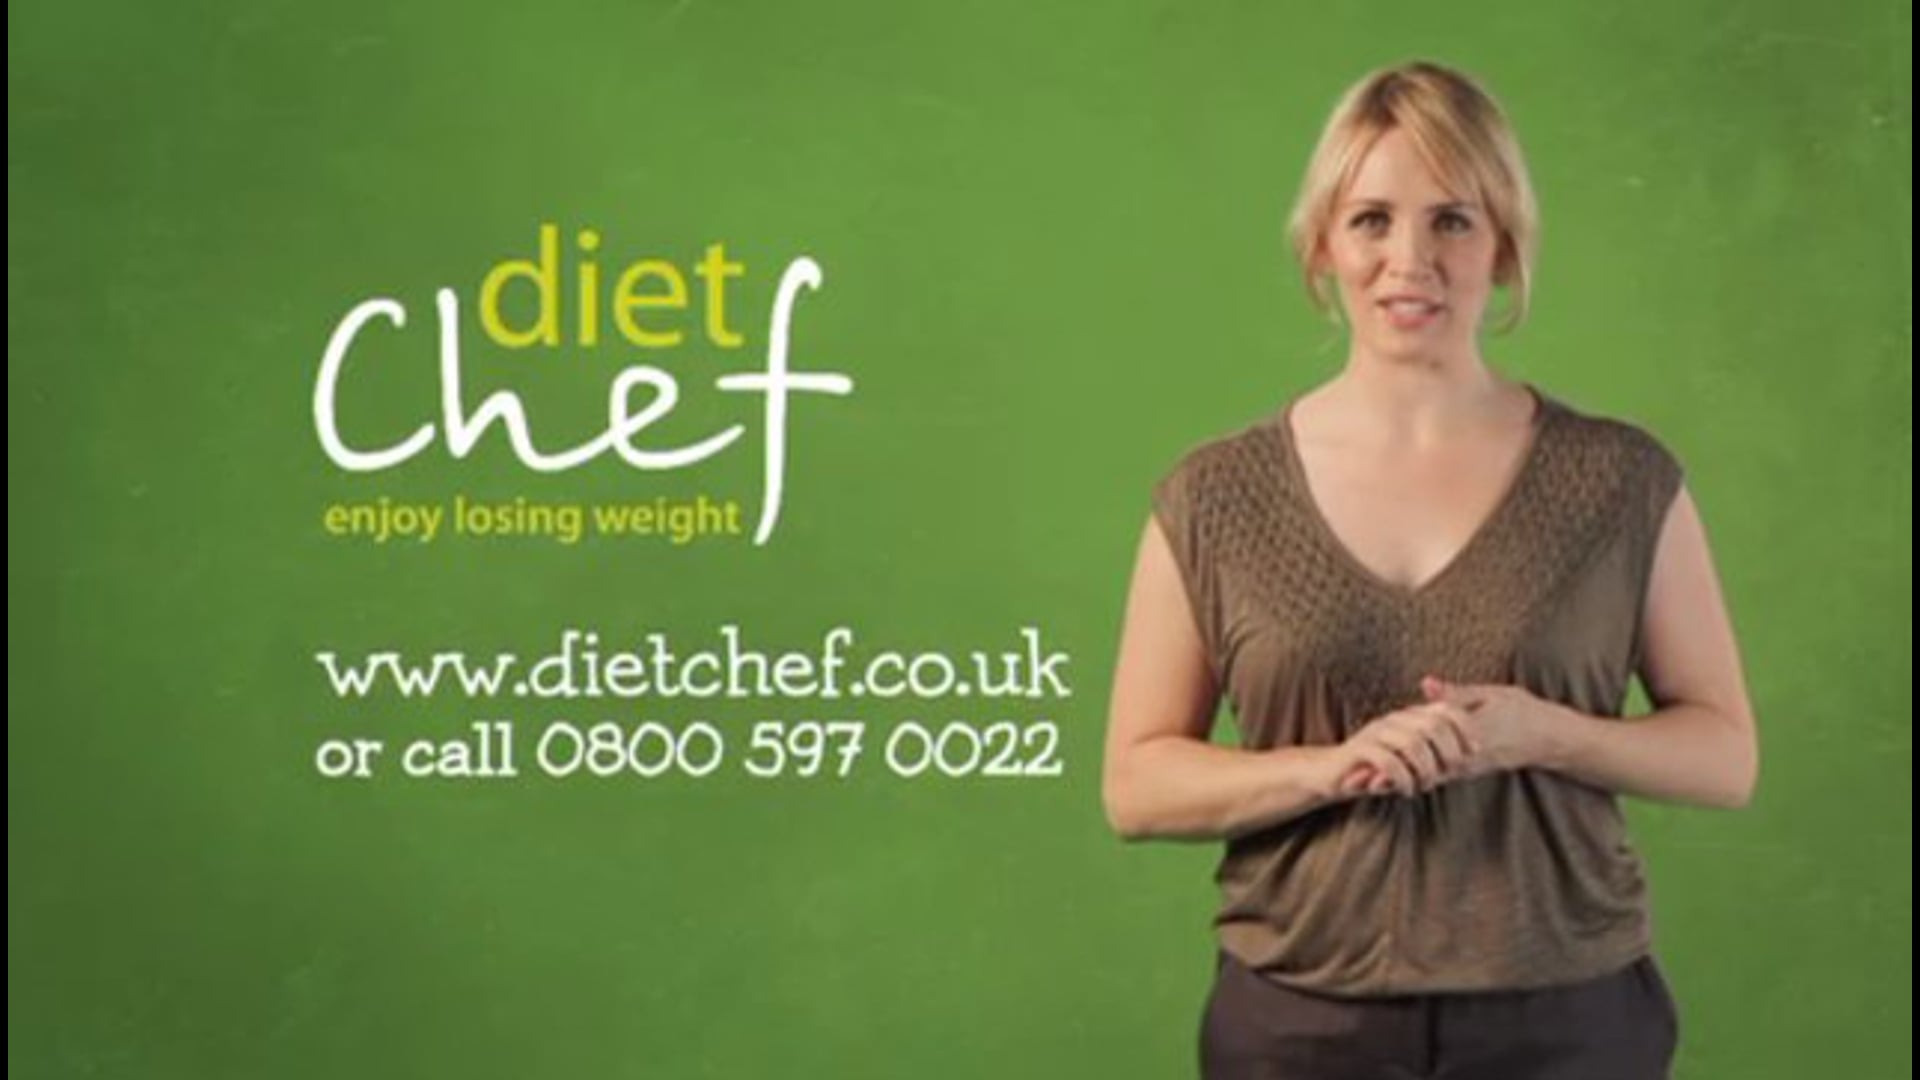 The new Autumn 2012 TV Advert for Diet Chef